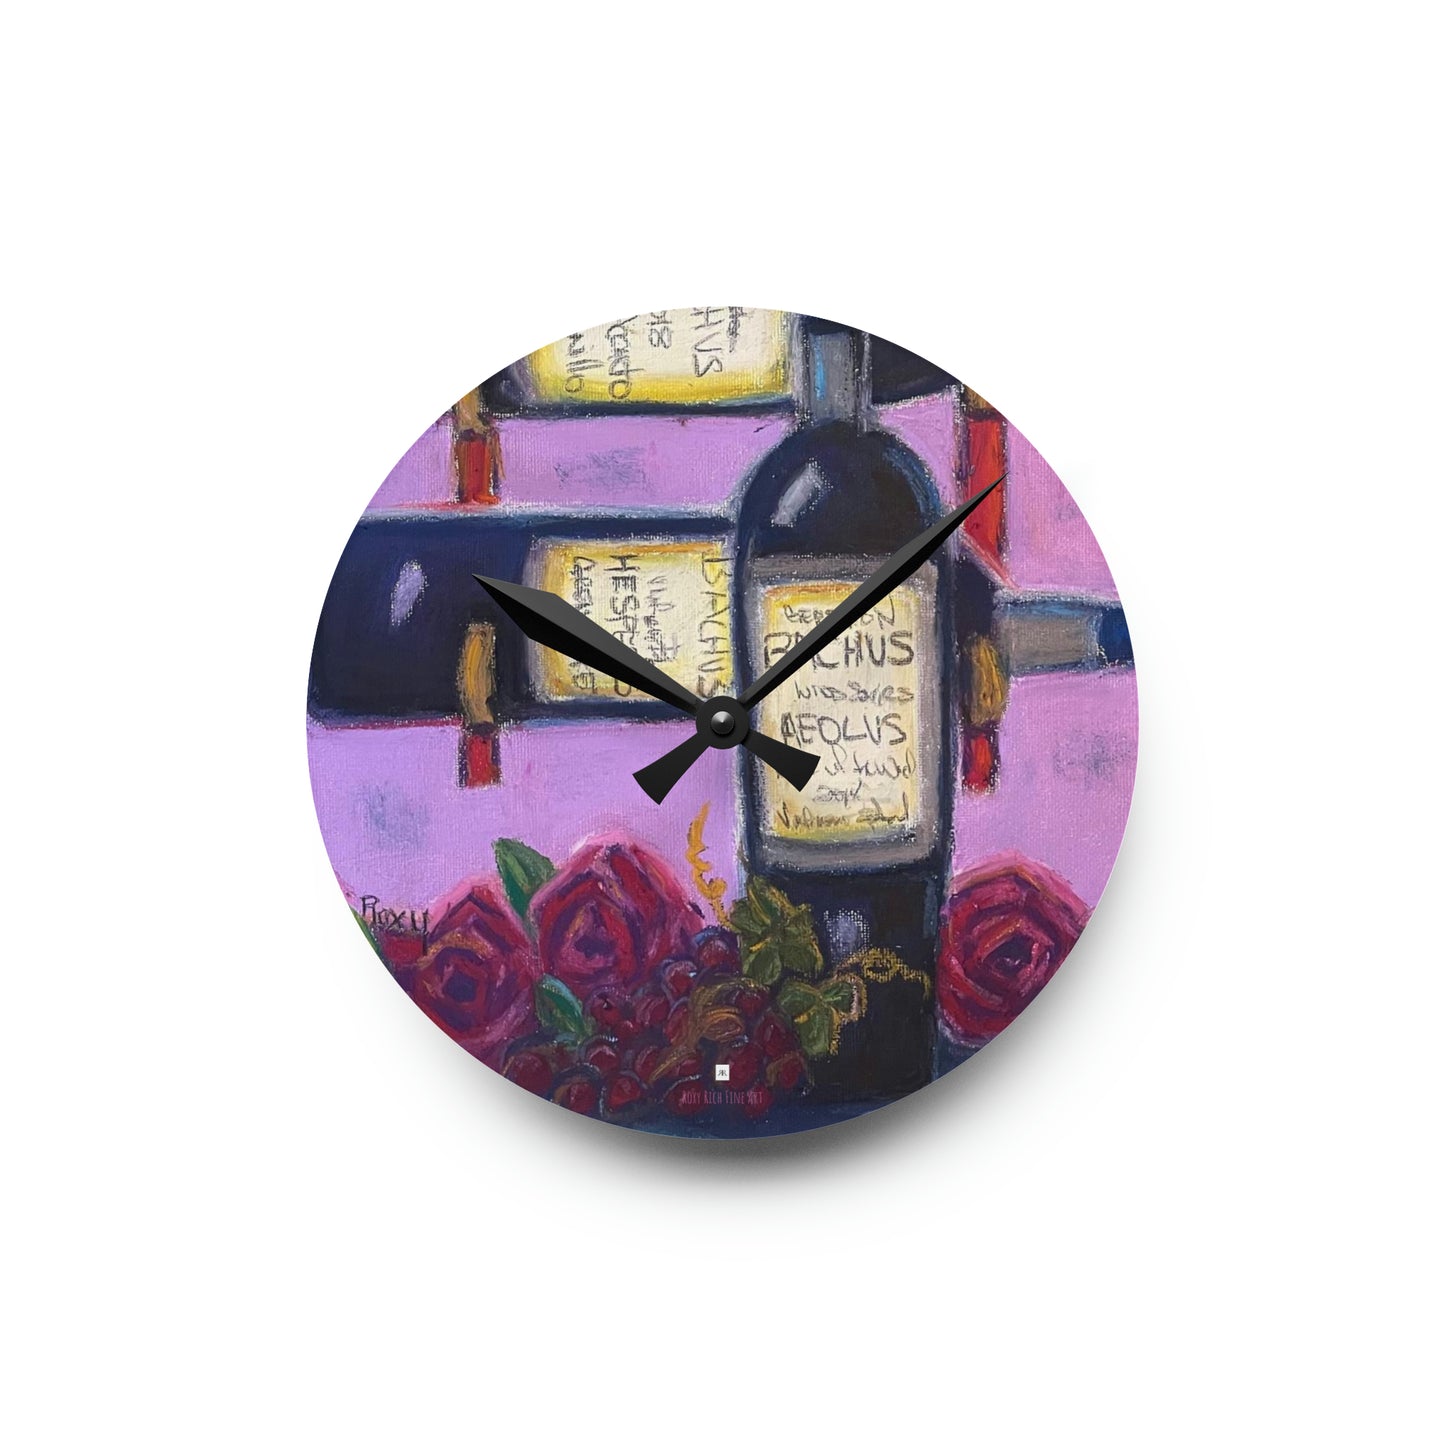 Bachus Reserves GBV Wine Rack and Roses Acrylic Wall Clock